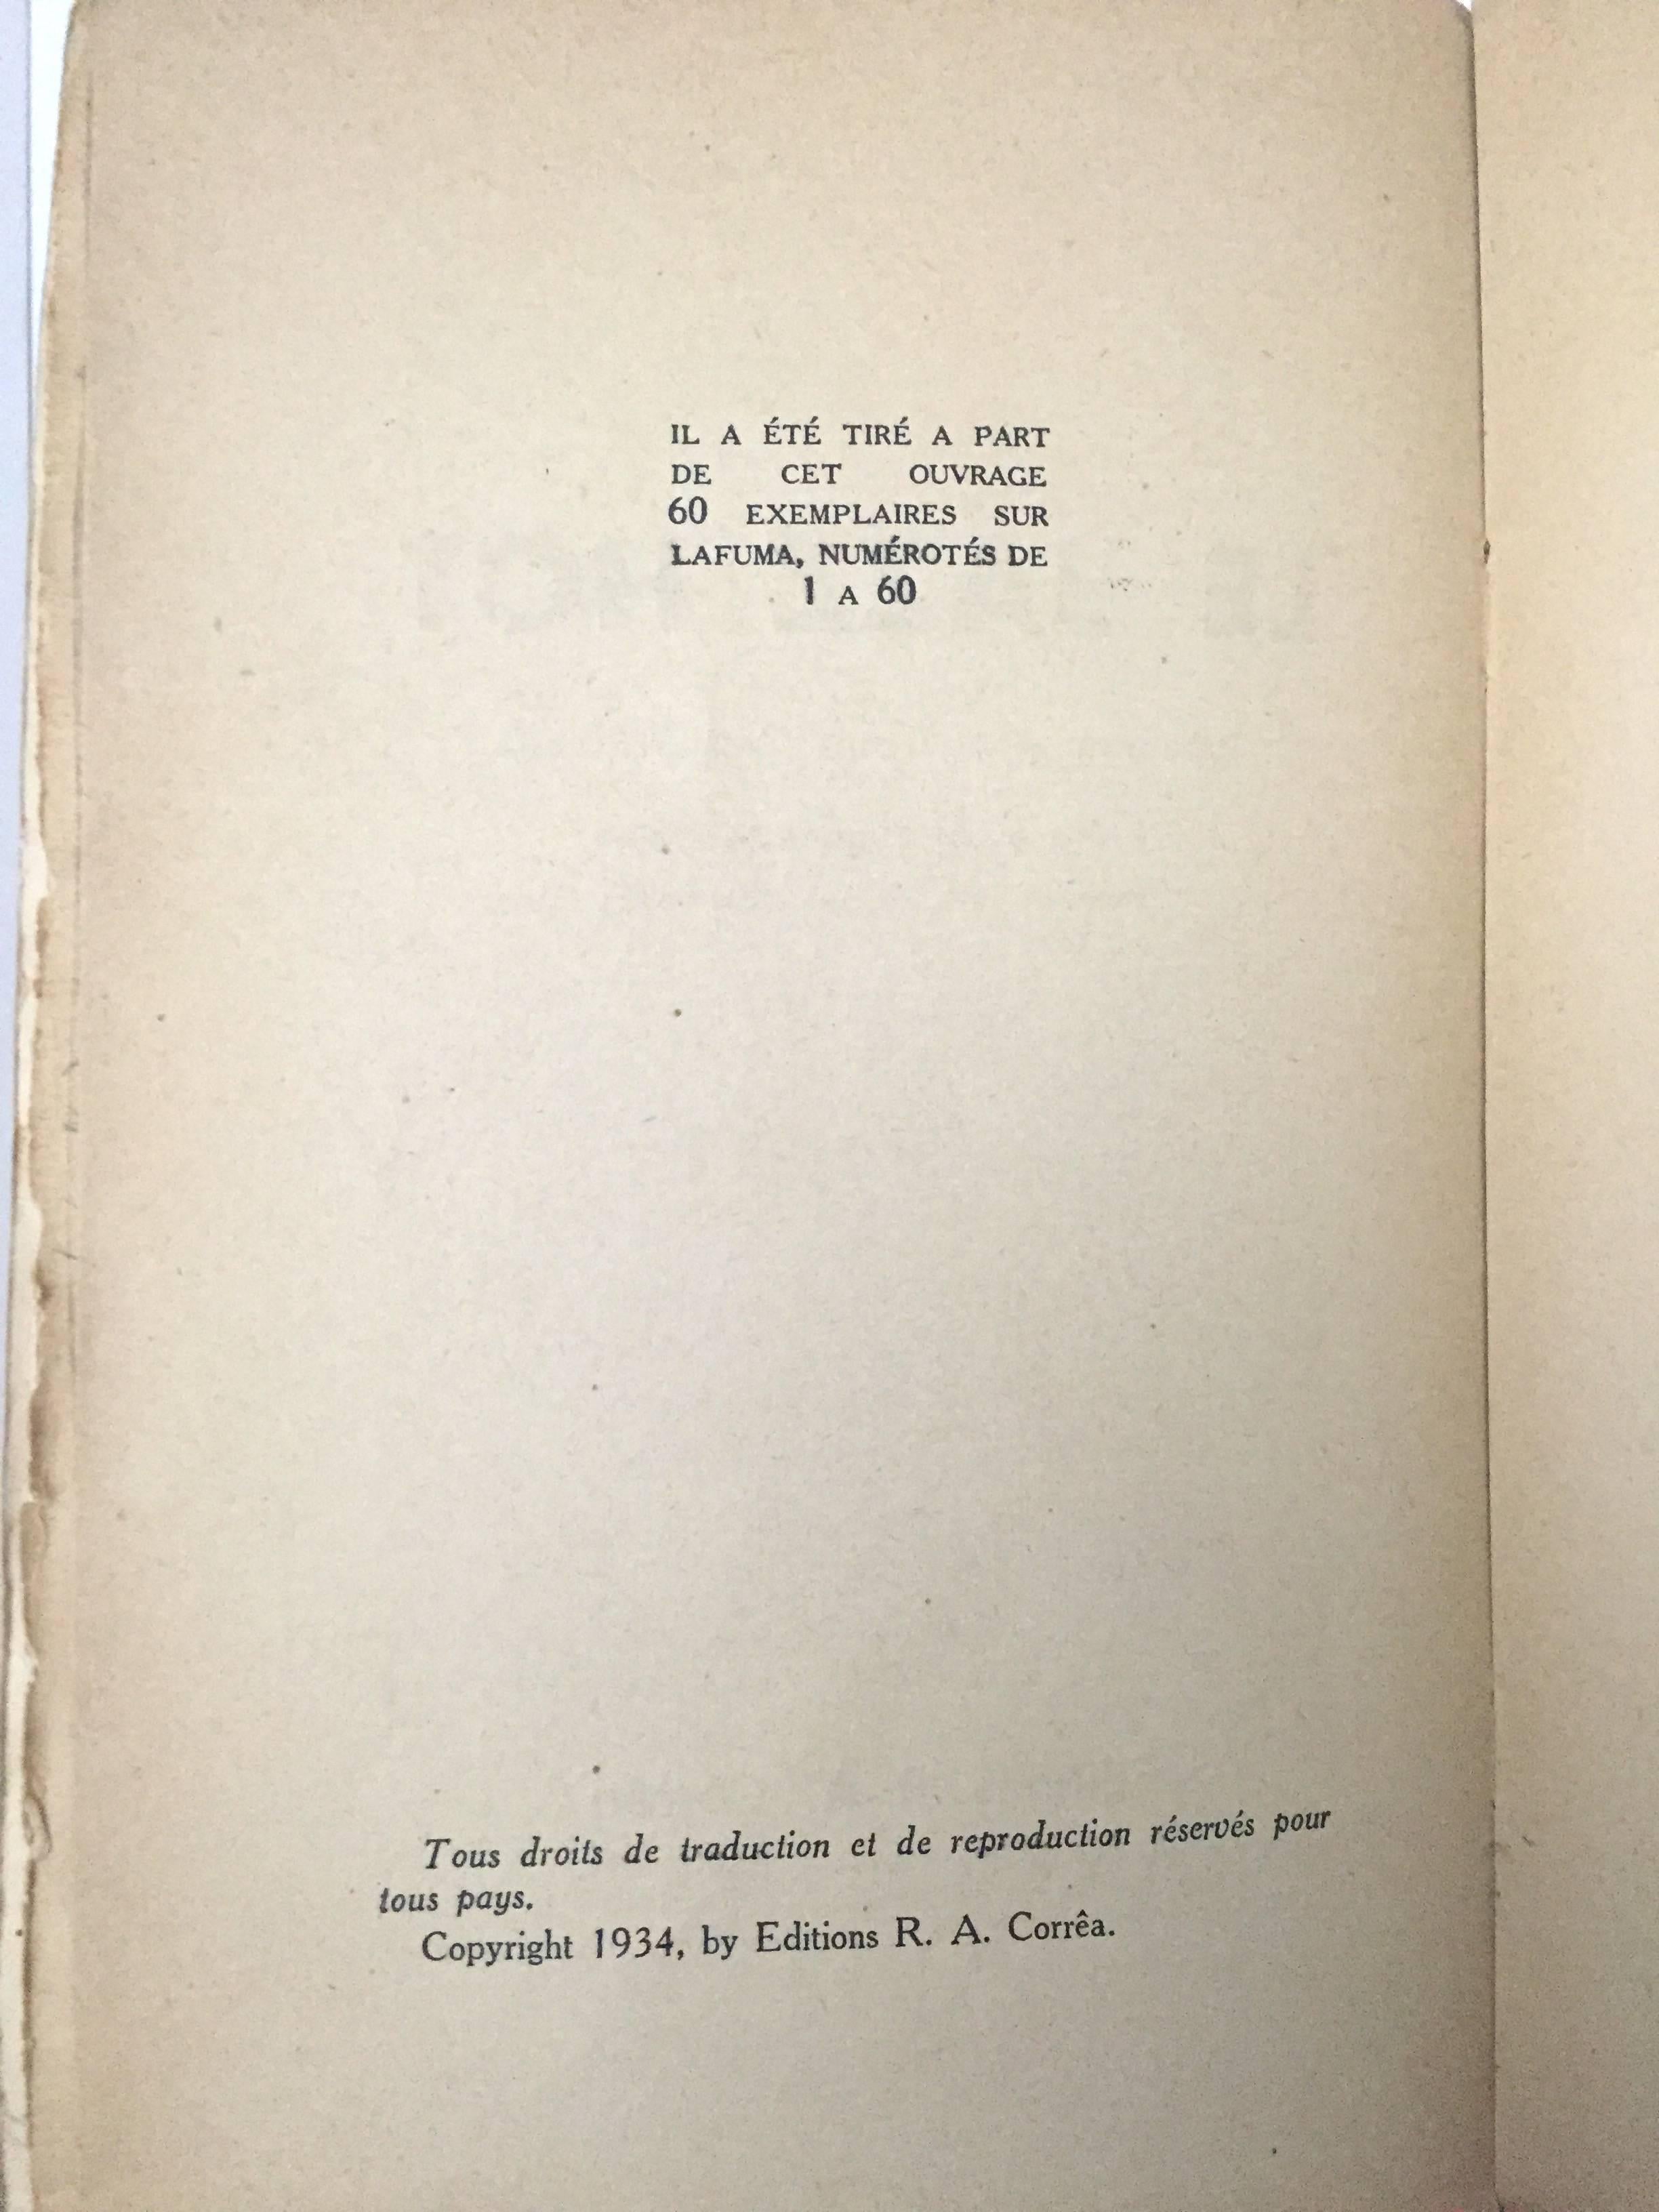 First edition. 

Published in 1934 by Editions R.A Corrêa, Paris.

Introduction by Louis Armstrong. 

An incredible rare and historically significant first edition of one of the earliest works on Jazz music. Written by the founding member of